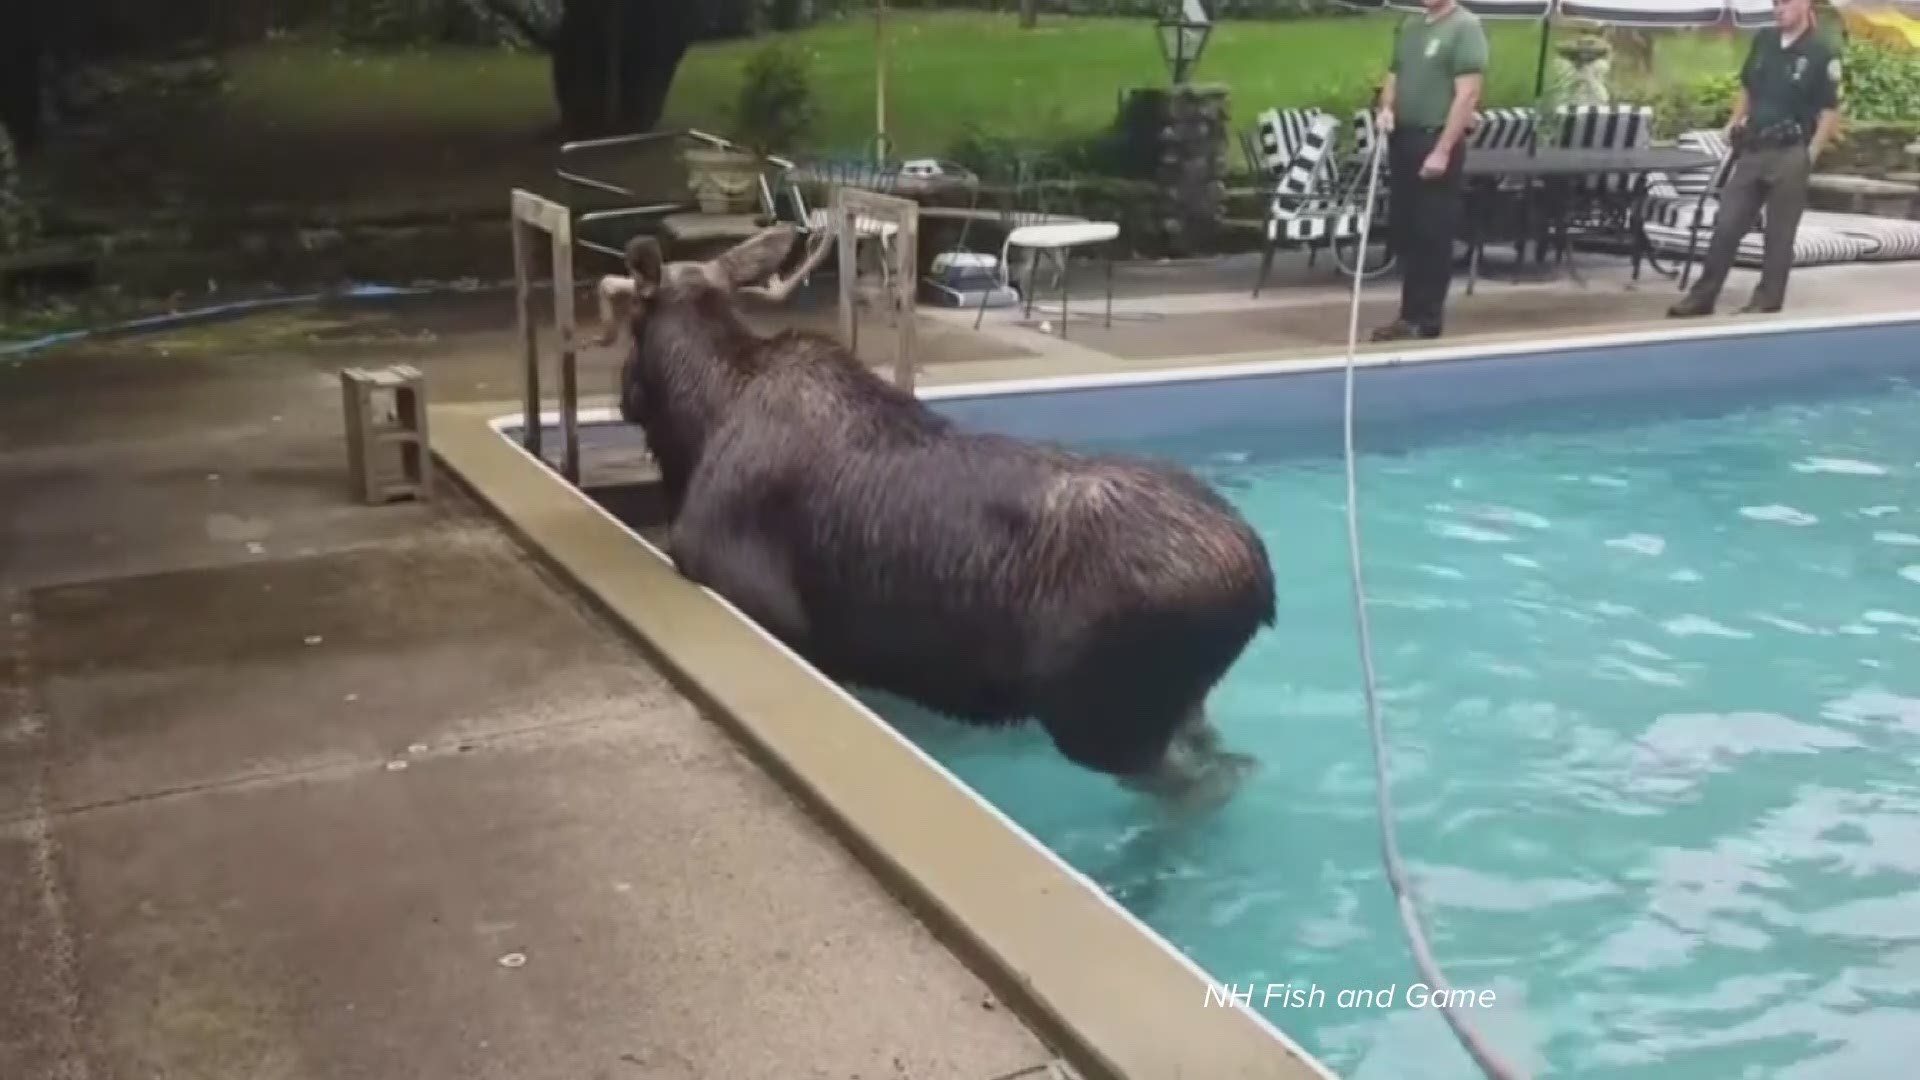 New Hampshire Fish and Game helped a stranded moose get out of a pool on Wednesday, Oct. 2, in Bedford, N.H.